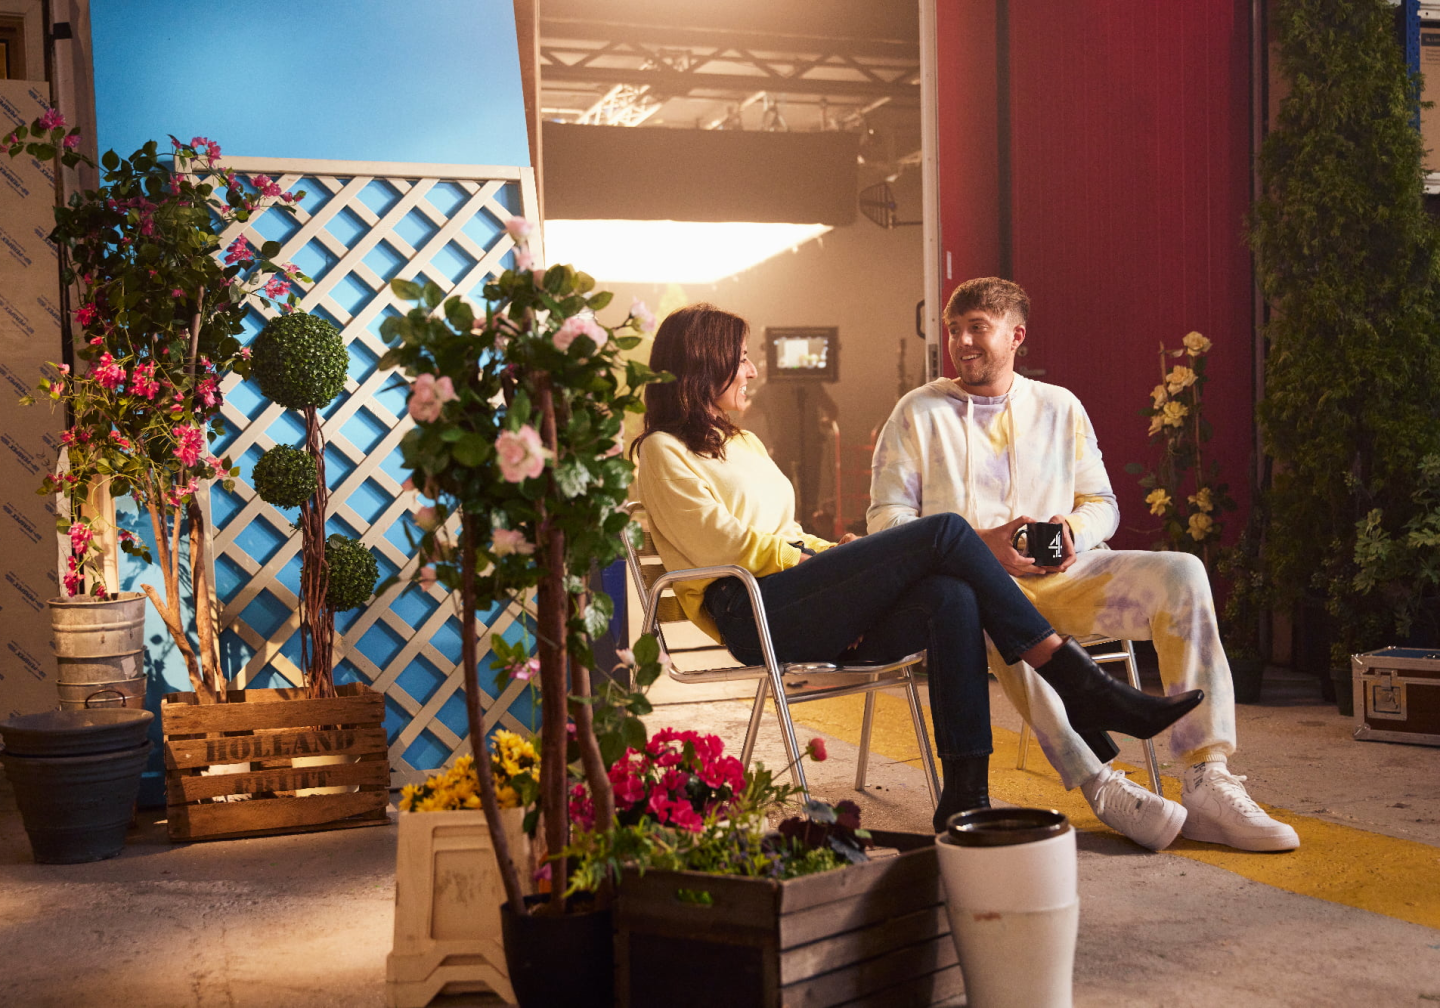 Campaign image for Benenden Health time for a check in campaign - Davina McCall and Roman Kemp sitting in a room chatting